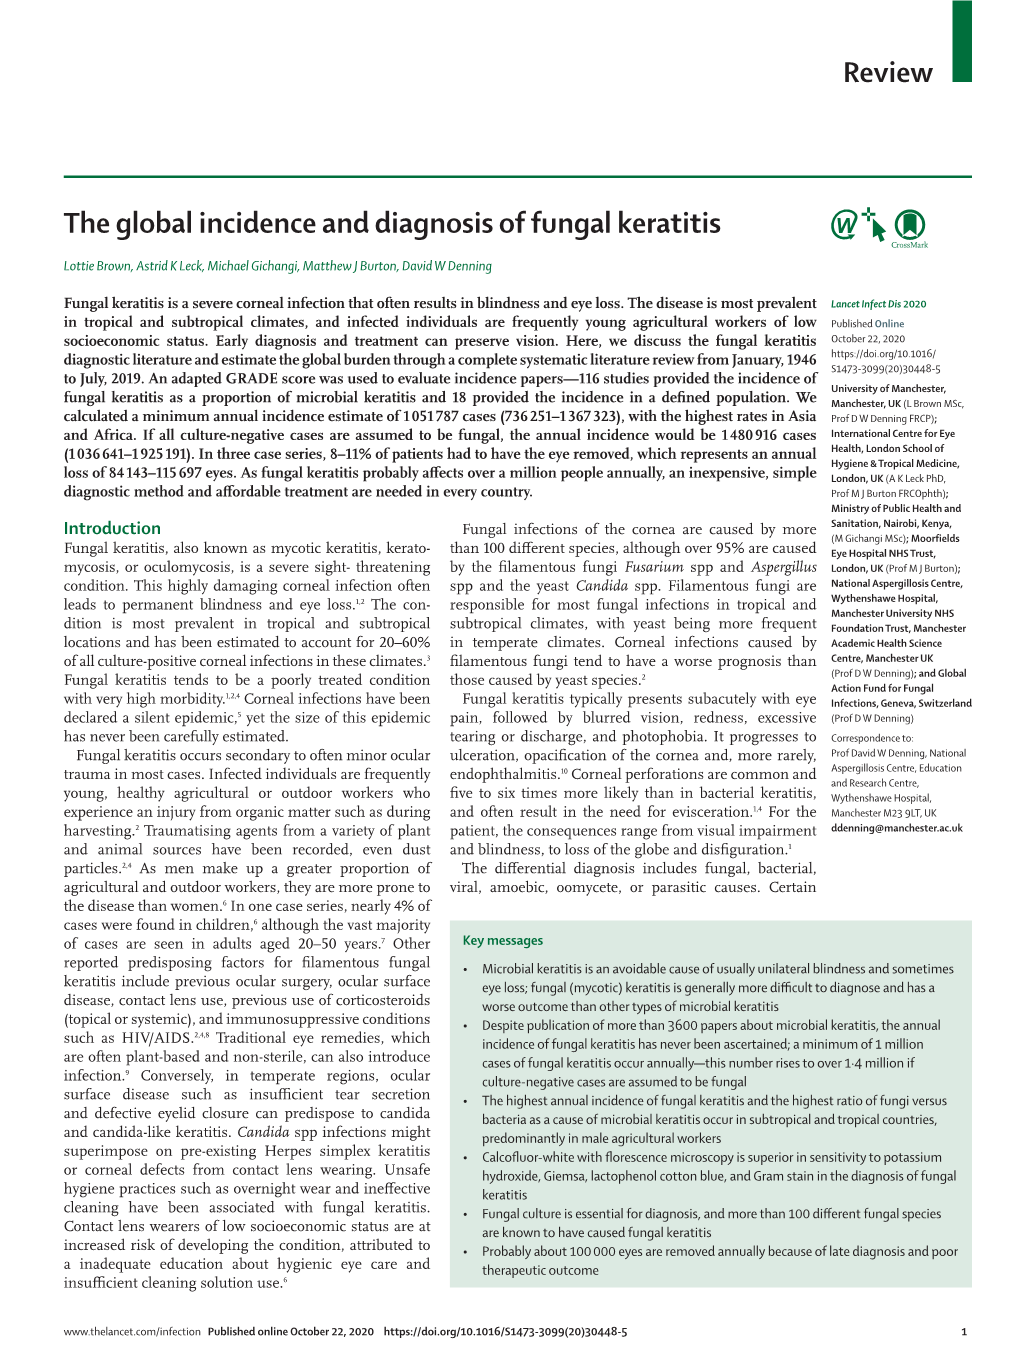 Review the Global Incidence and Diagnosis of Fungal Keratitis